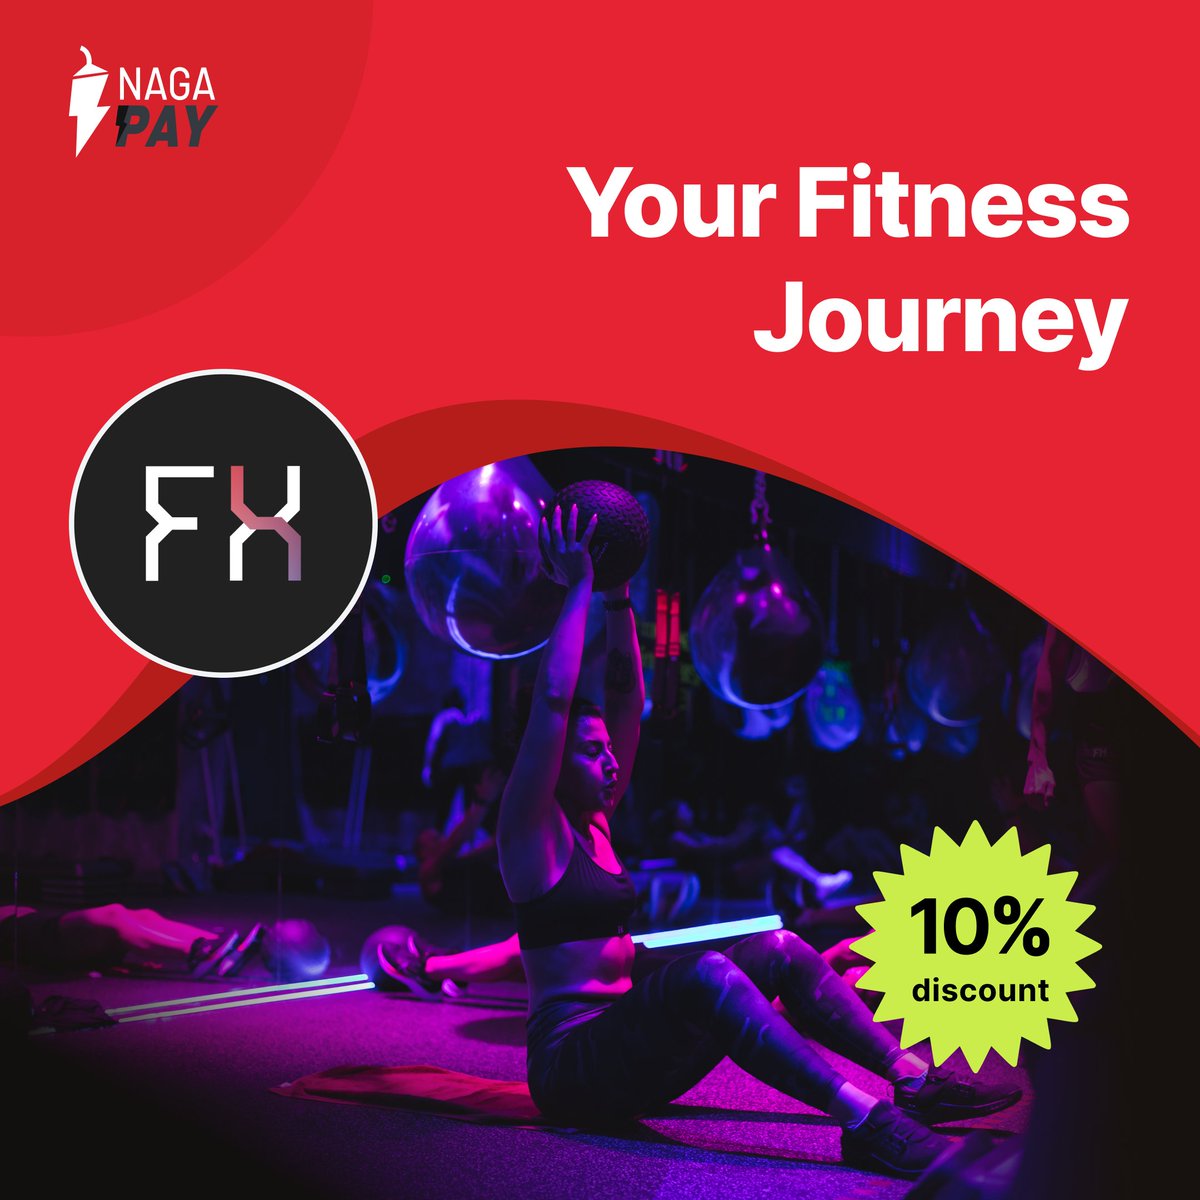 Transform Your Fitness Journey with Fuel House CY💪 🚀NAGA Pay in collaboration with Fuel House CY, is delighted to offer a fantastic 10%* discount on gym memberships to help you get in the best shape of your life. *T&Cs apply. 👉pay.naga.com/our-partners🌐